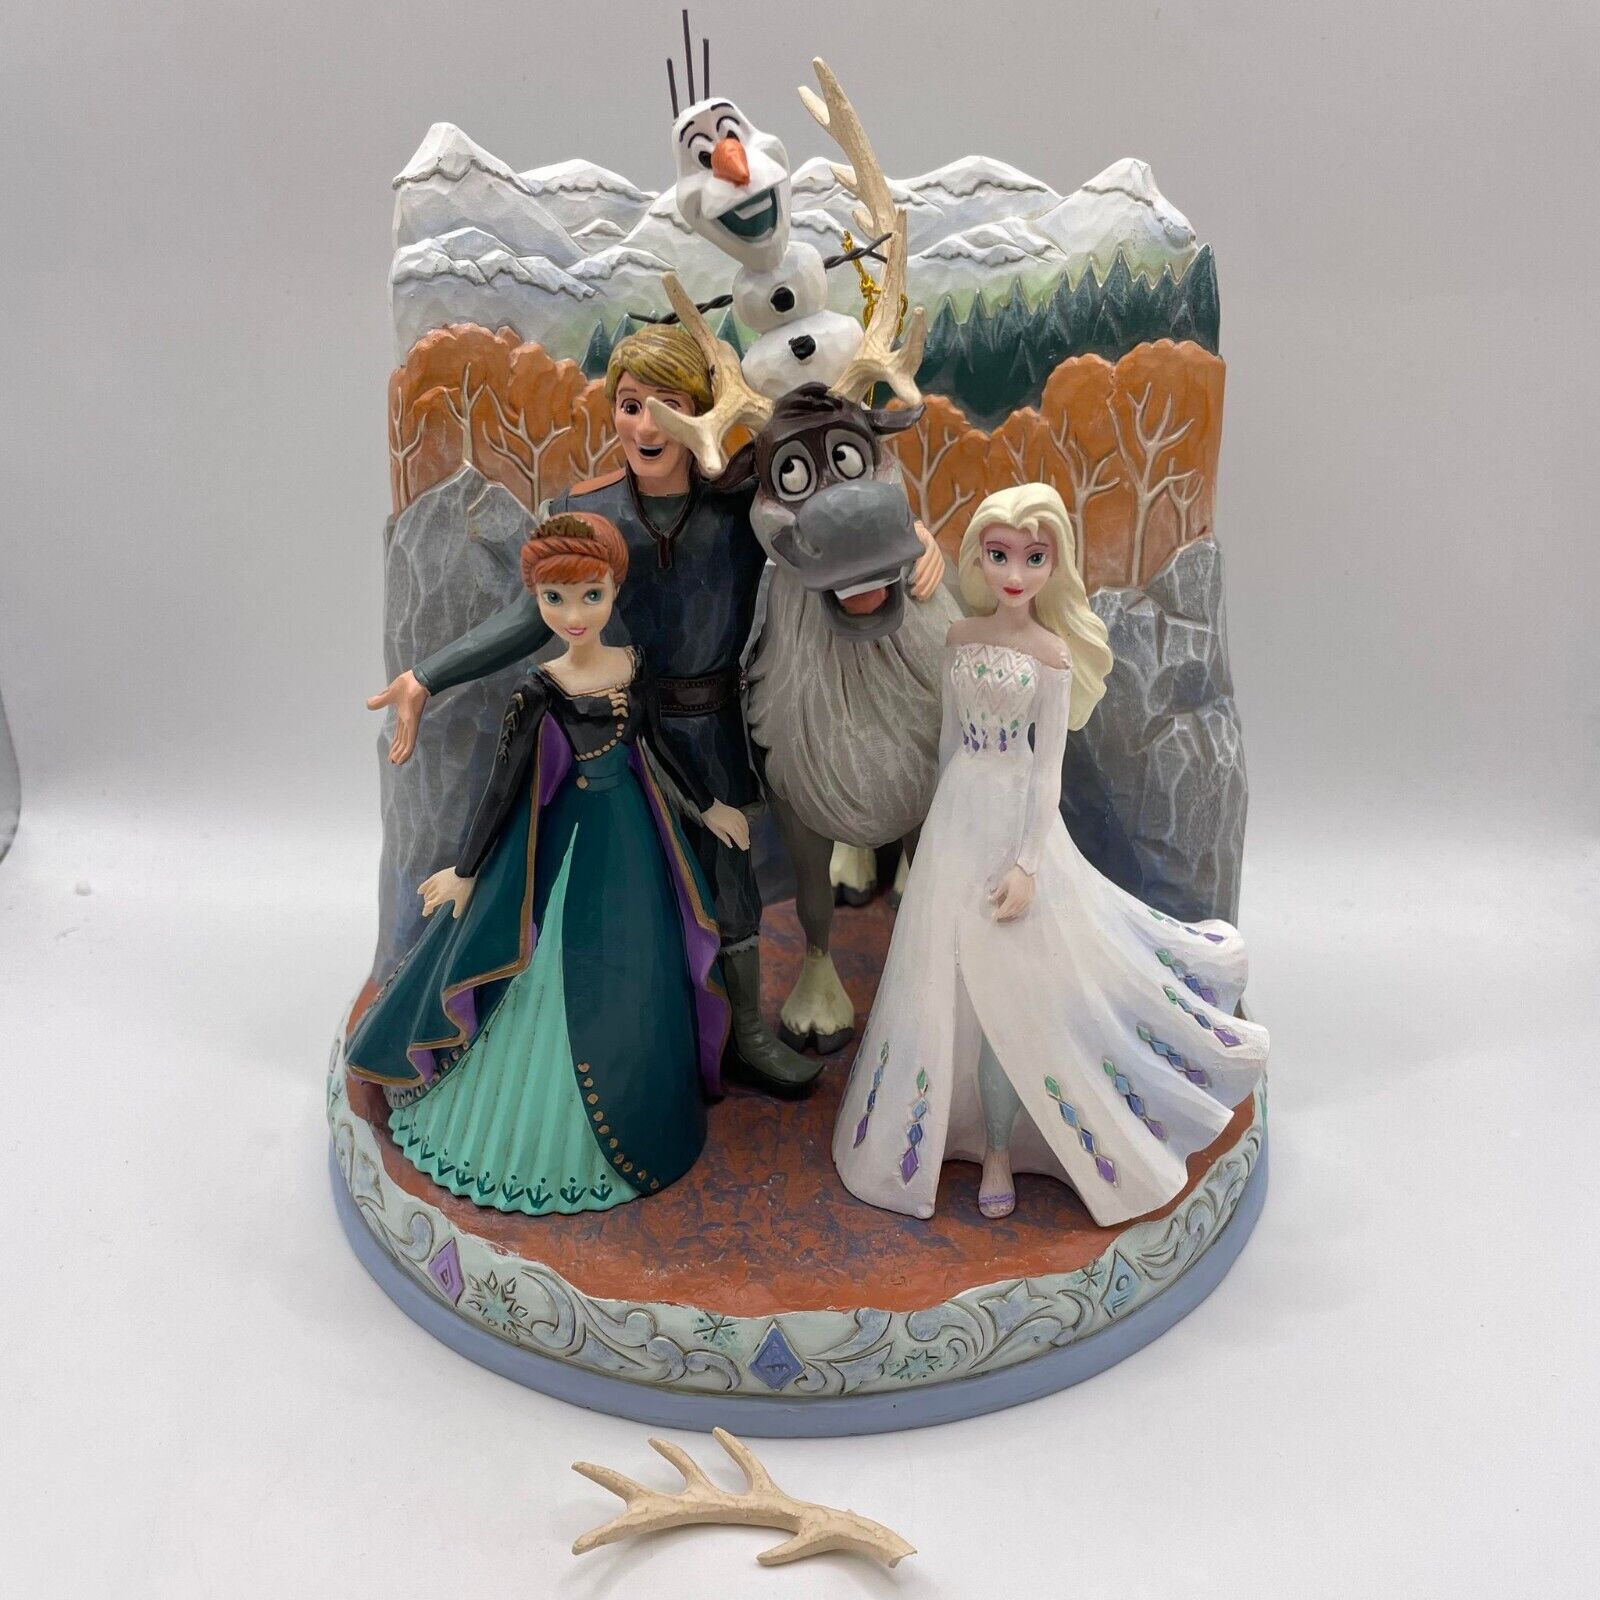 Disney Traditions Connected Through Love Frozen 2 Figurine 6013077 Damaged